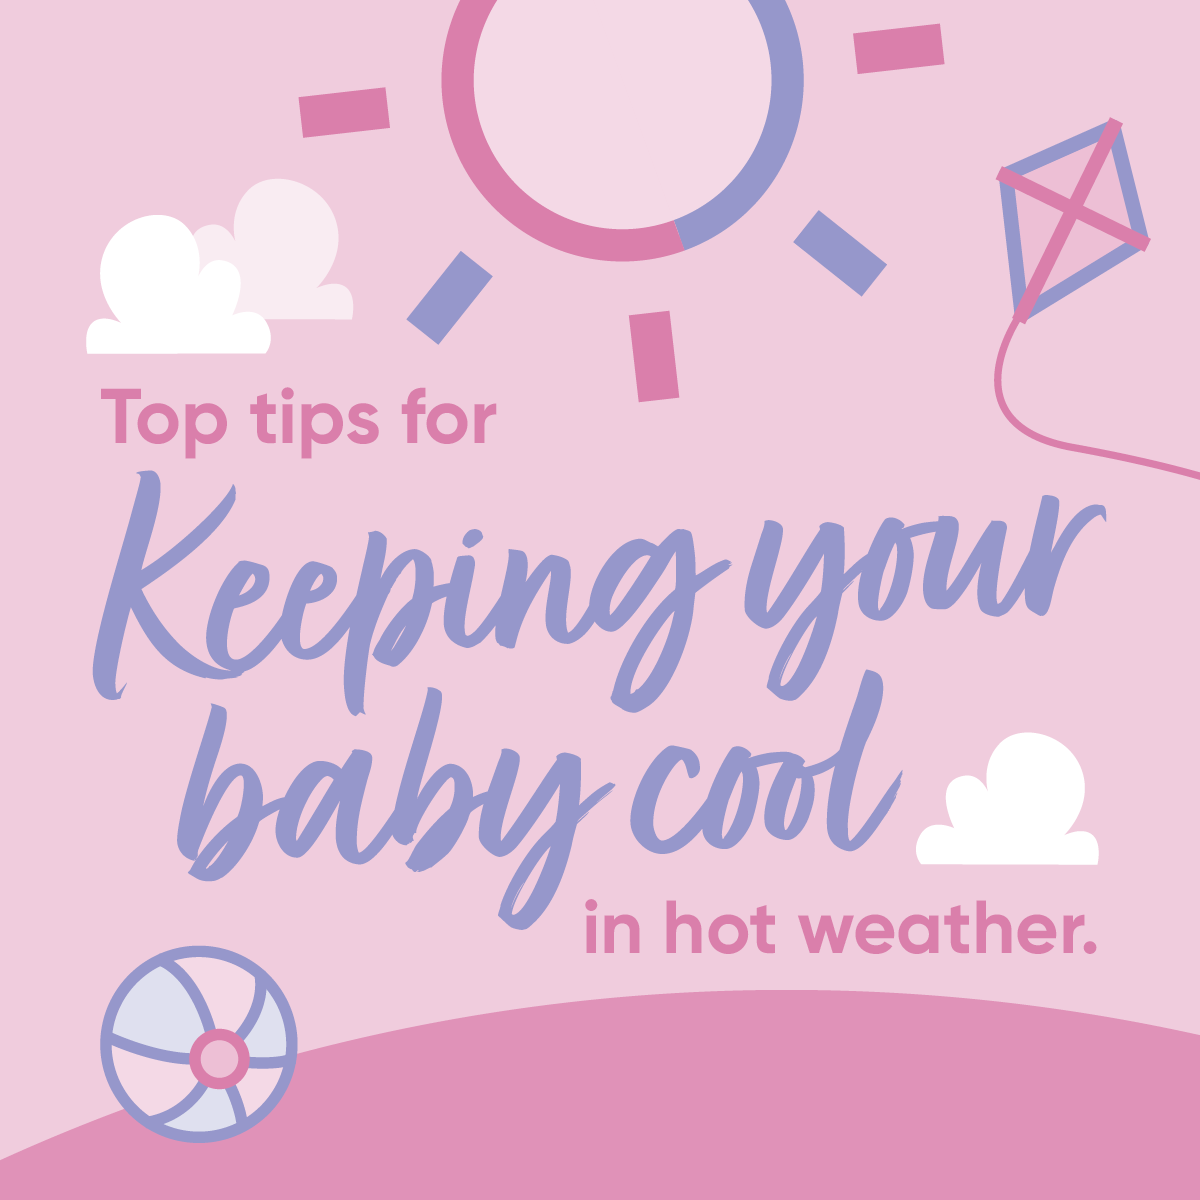 Top tips for keeping your baby cool in hot weather